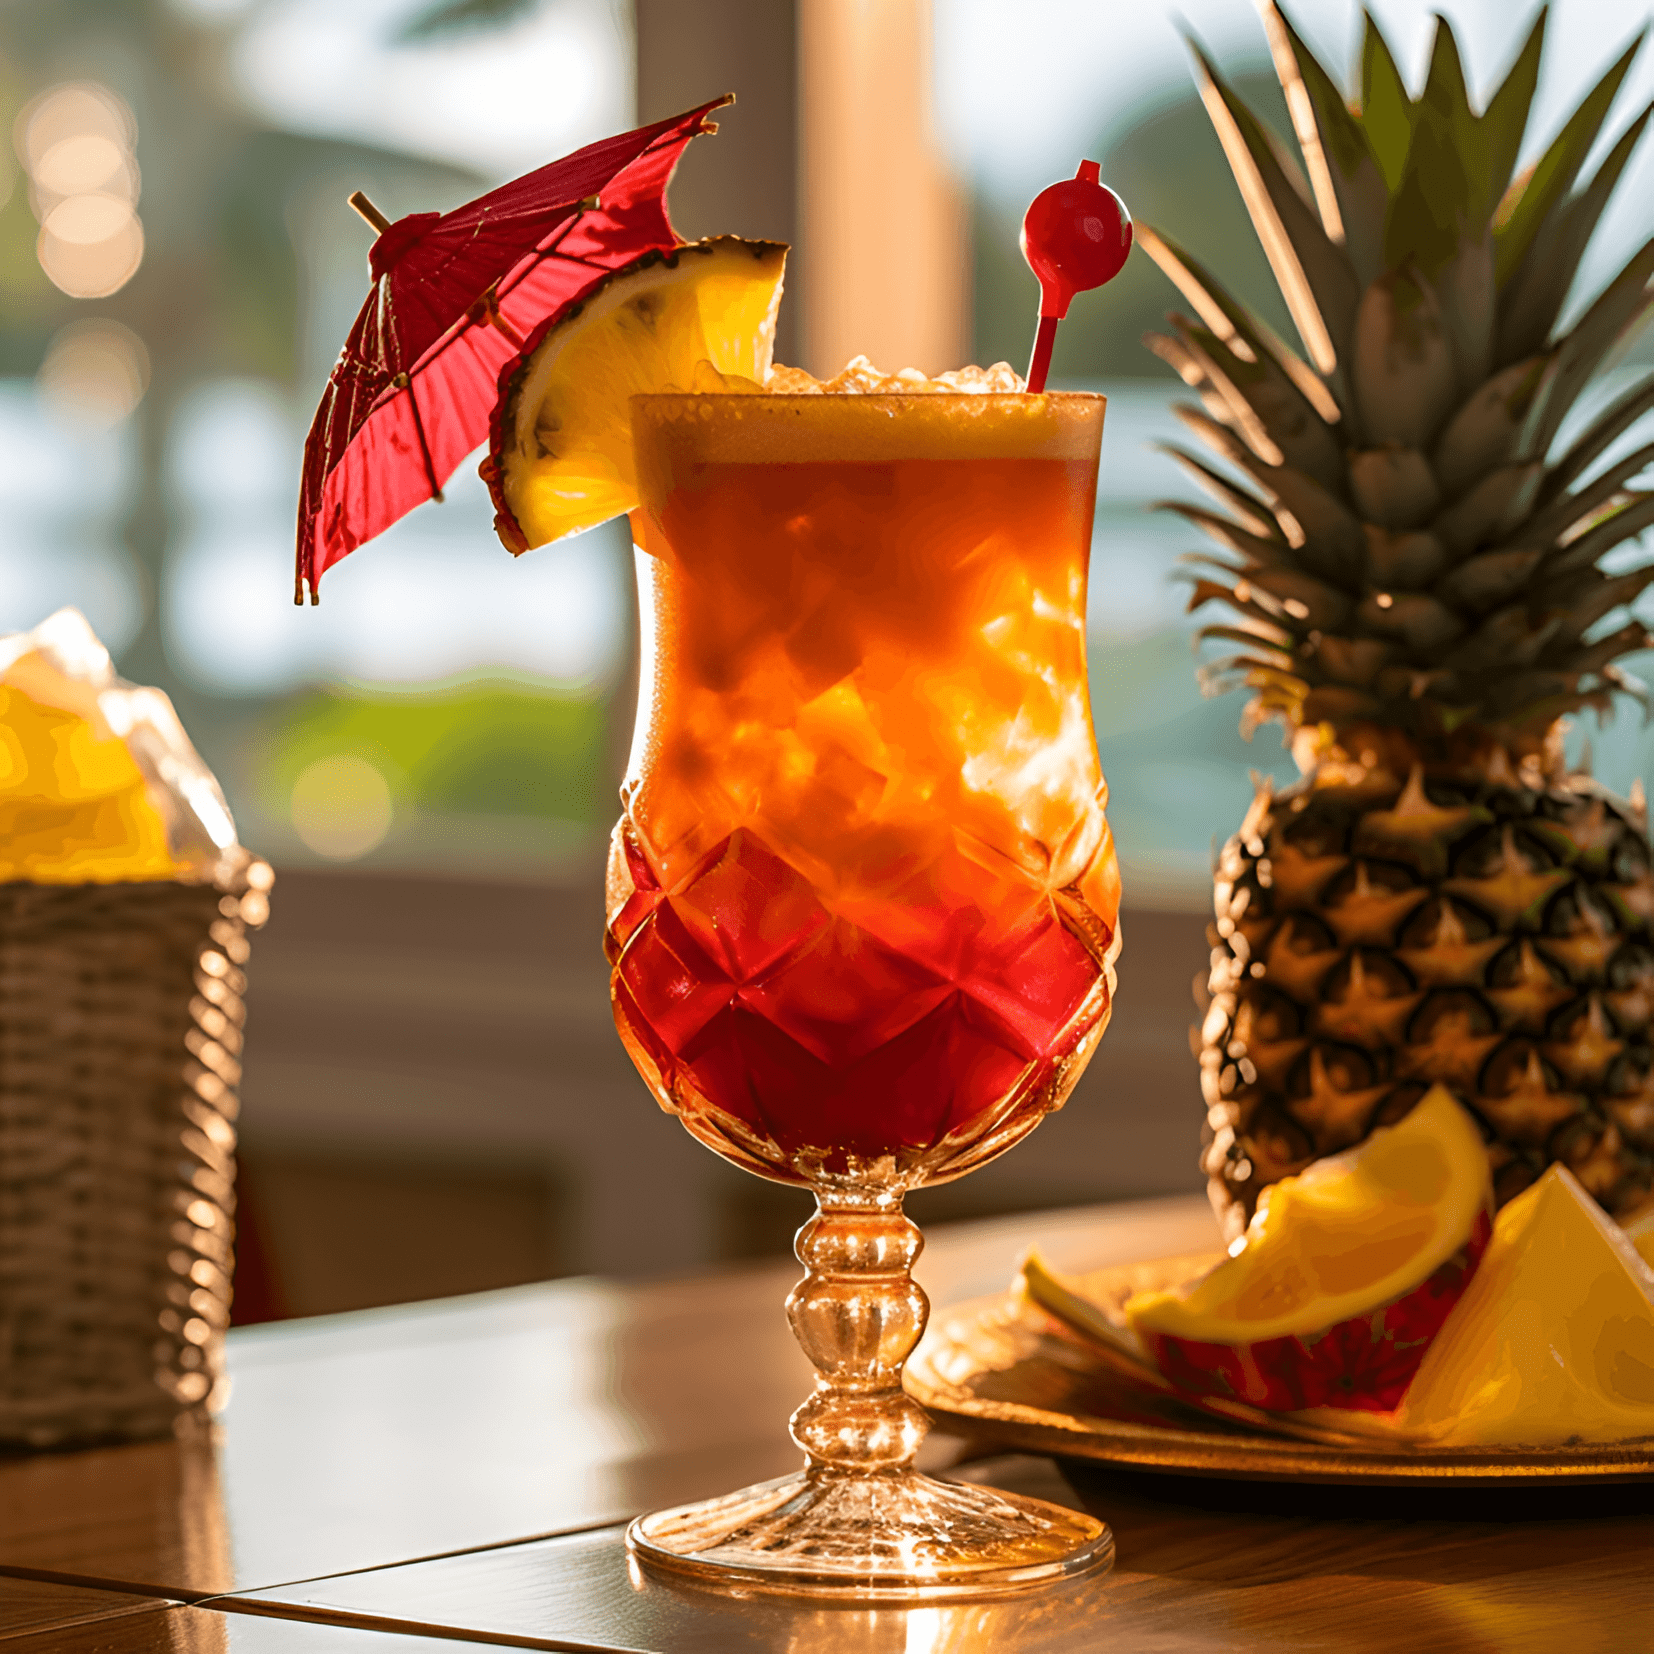 Fruit Punch Cocktail Recipe - The Fruit Punch cocktail is a delightful blend of sweet, sour, and fruity flavors, with a refreshing and slightly tangy finish. The combination of various fruit juices and spirits creates a complex and well-balanced taste that is both invigorating and satisfying.